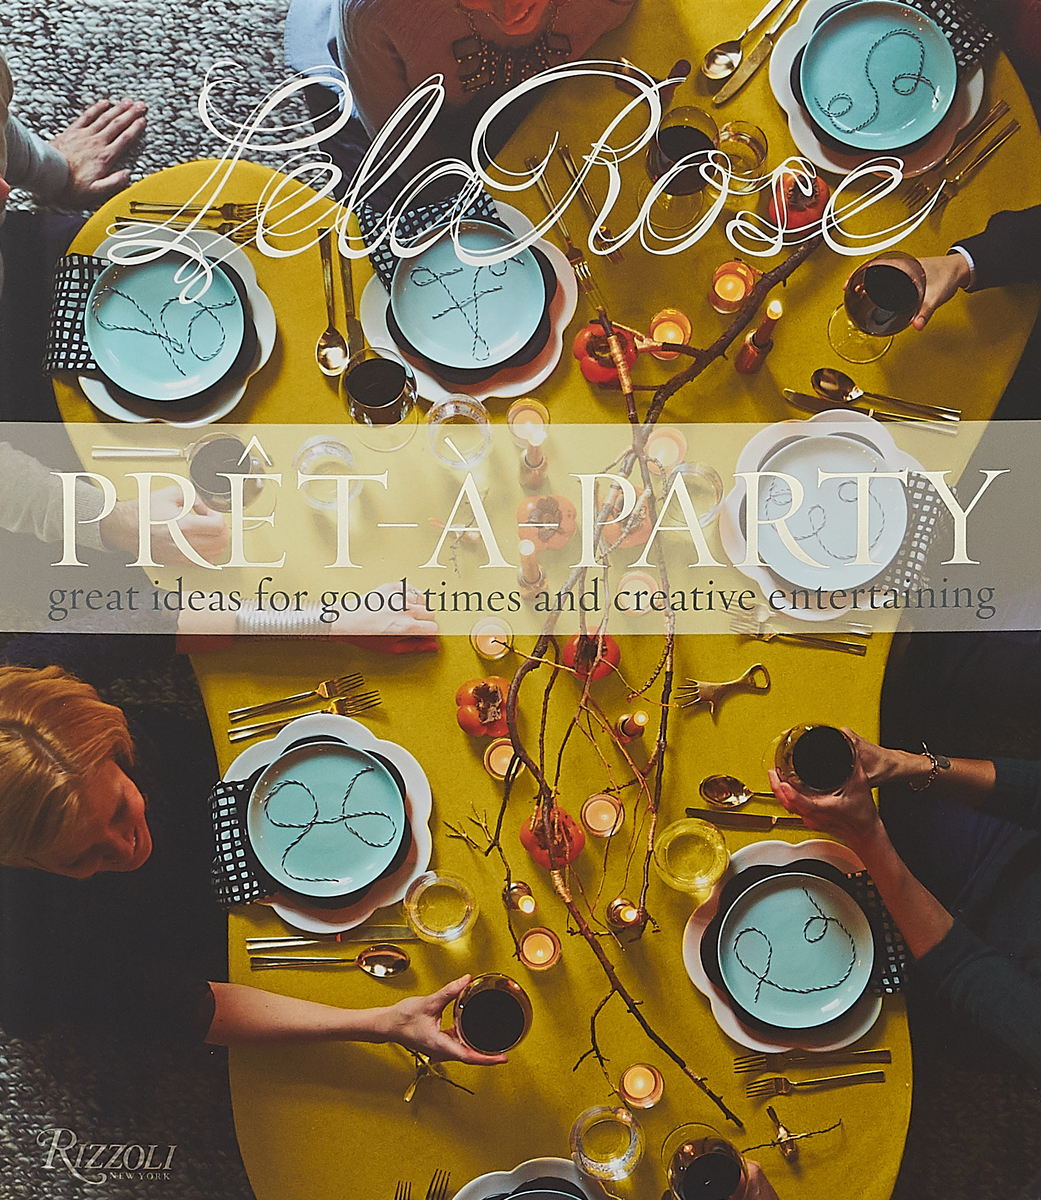 Pret-A-Party: Great Ideas for Good Times and Creative Entertaining by Lela Rose